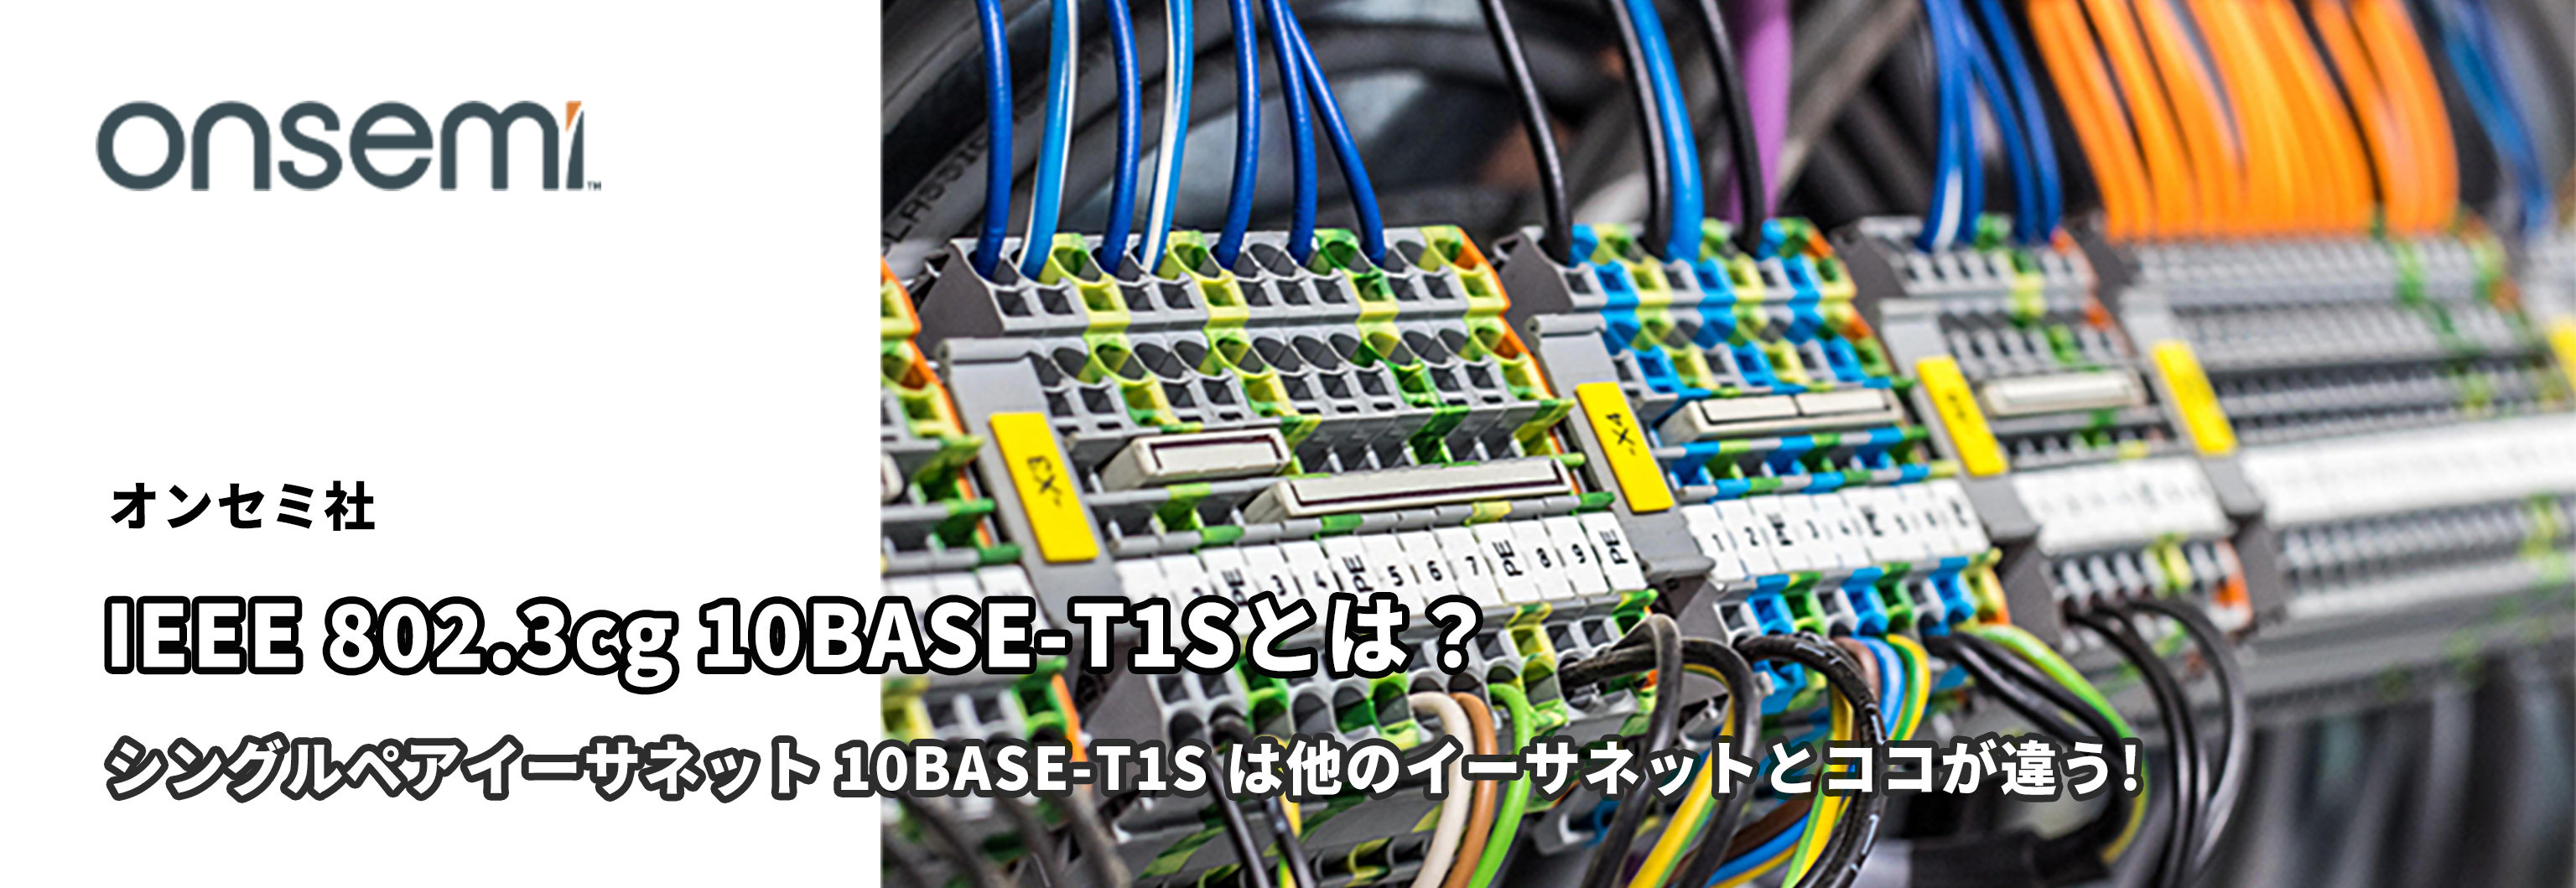 Single Pair Ethernet 10BASE-T1S is different from other Ethernet! What is IEEE 802.3cg 10BASE-T1S?